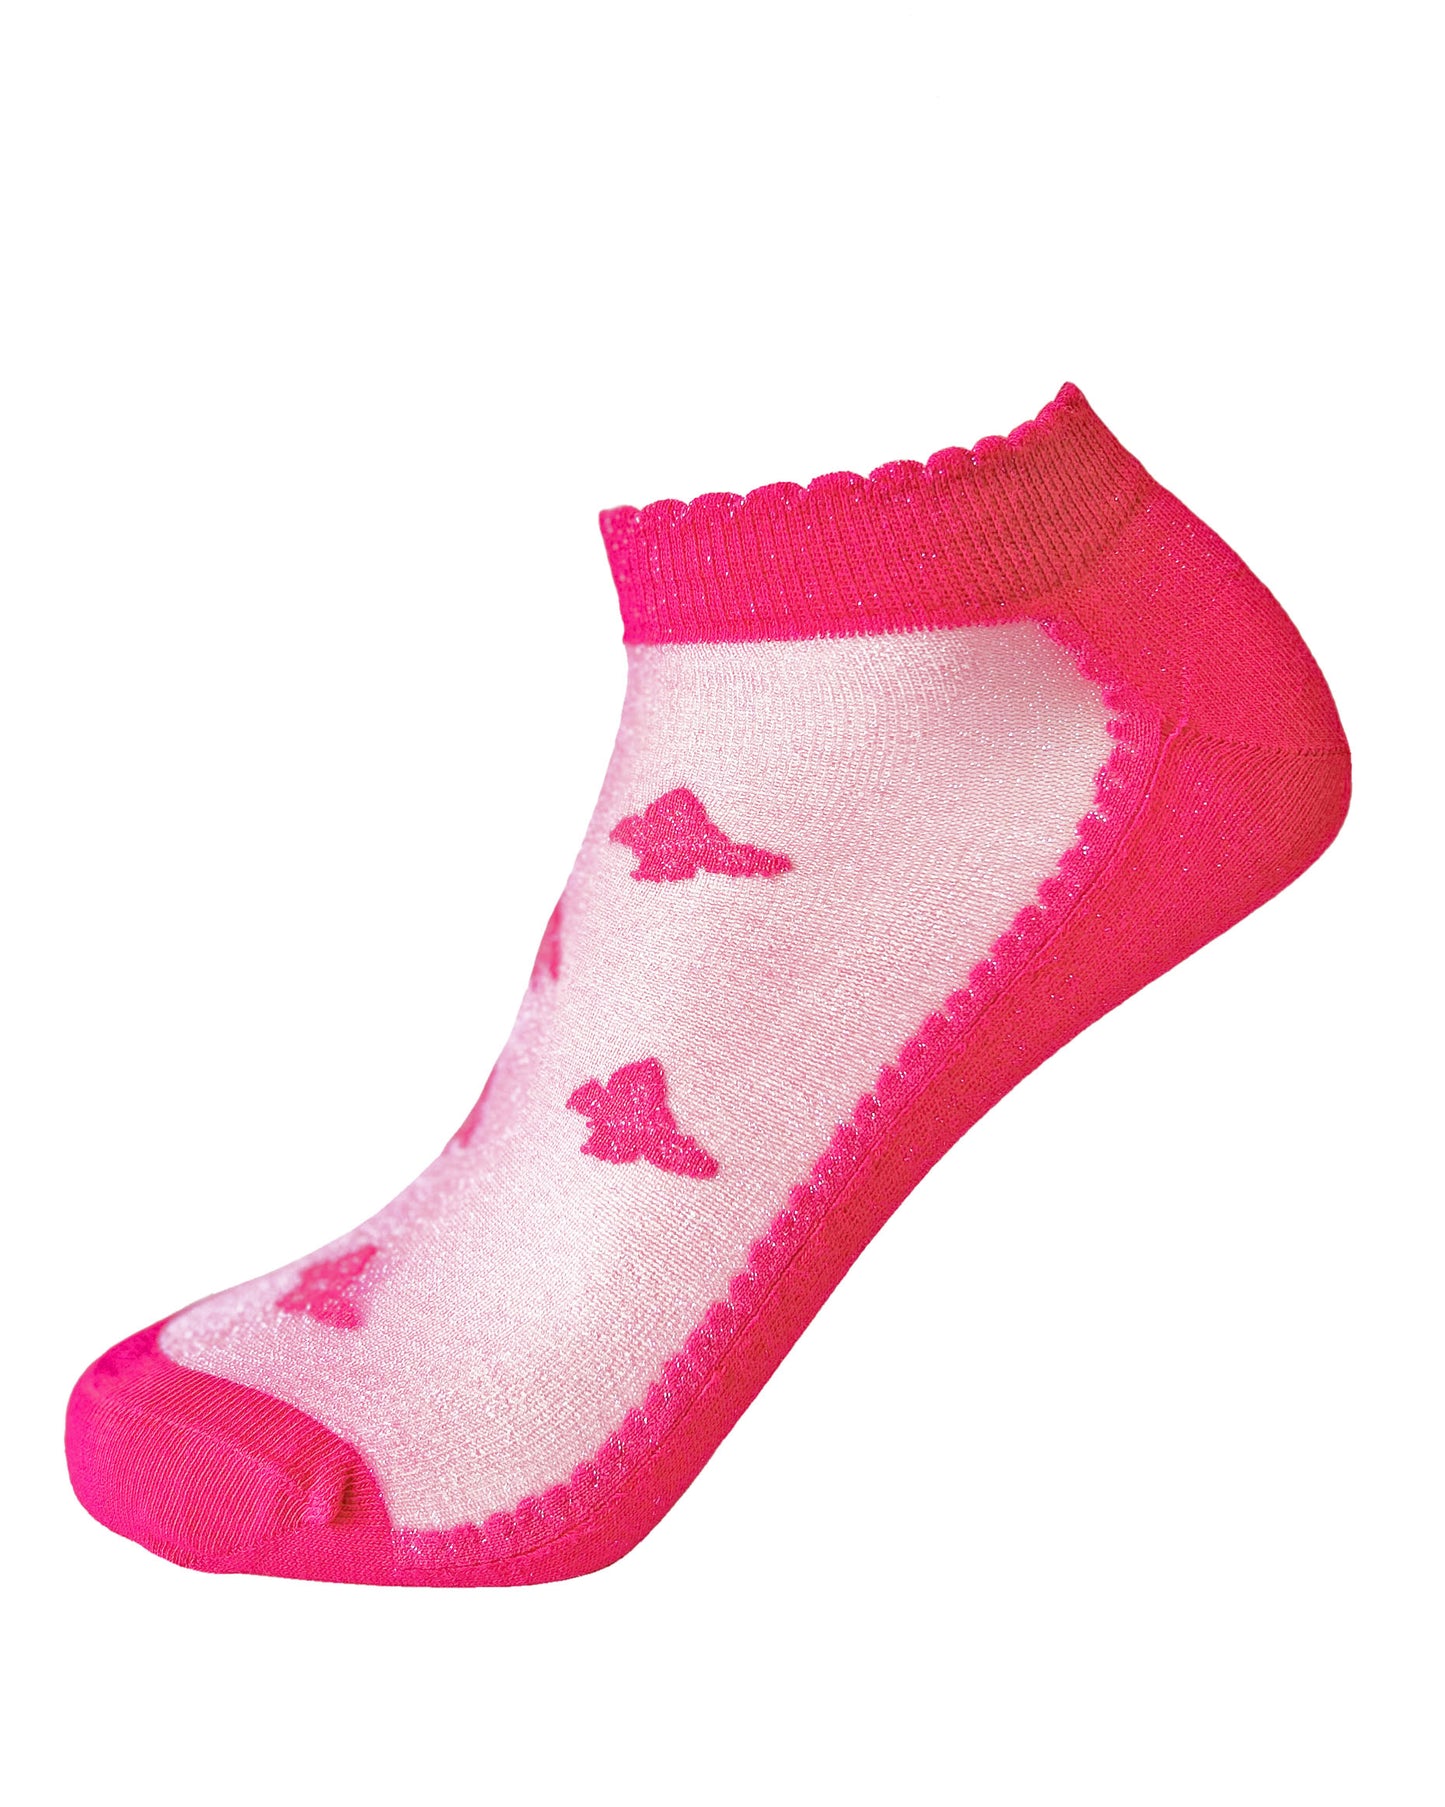 SiSi Butterfly Calzino - Soft low ankle bright pink sparkly cotton socks with a sheer front, butterfly motif pattern, shaped heal, flat toe seam and scalloped edge cuff.